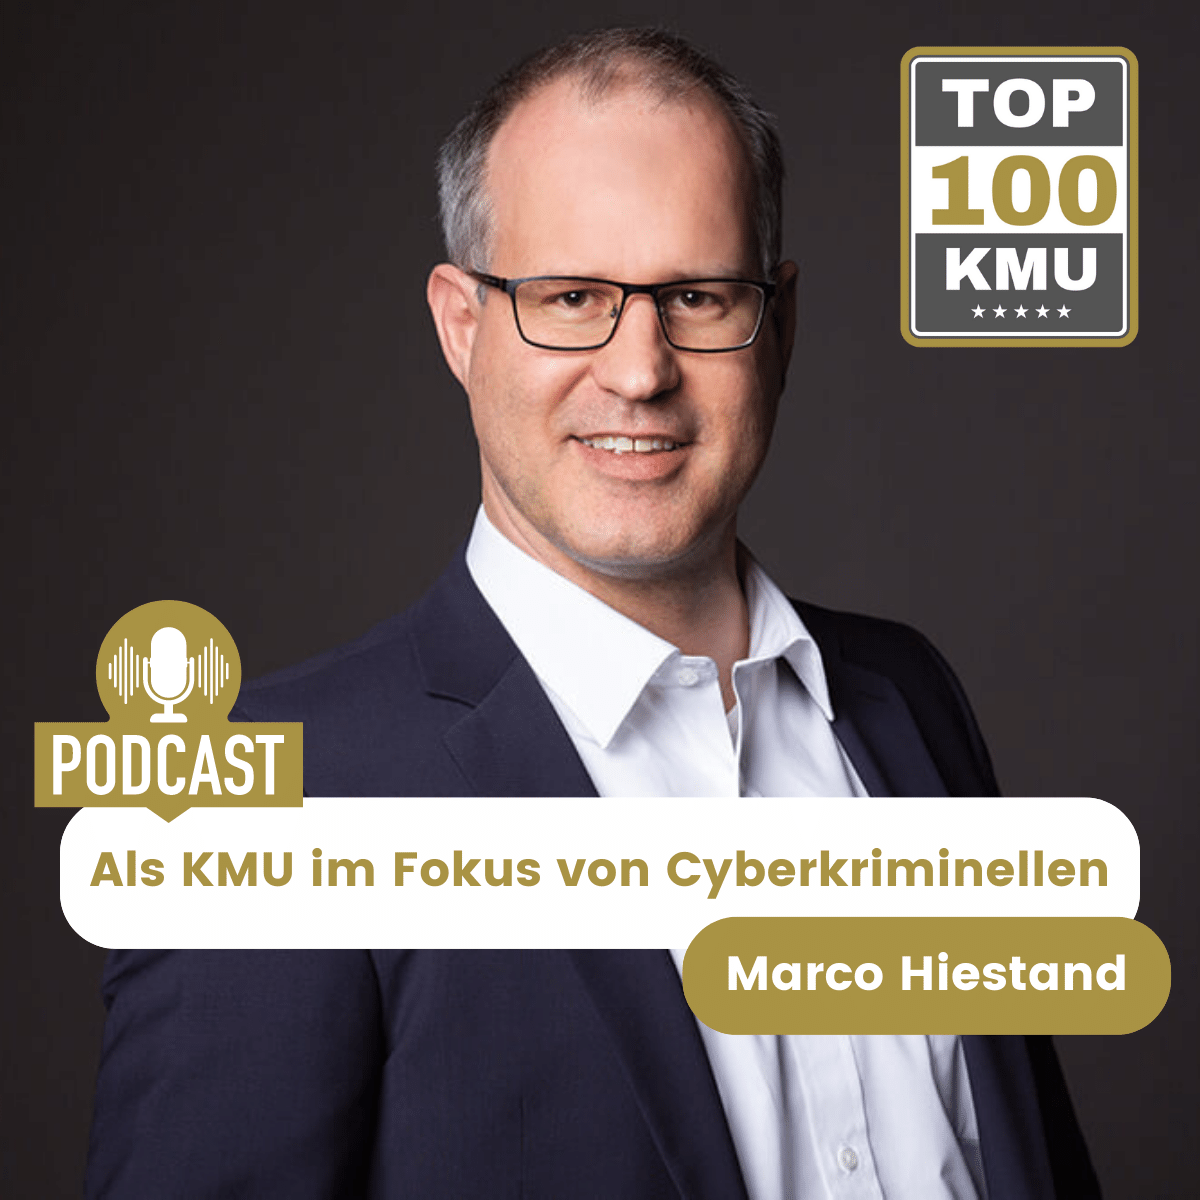 Marco Hiestand